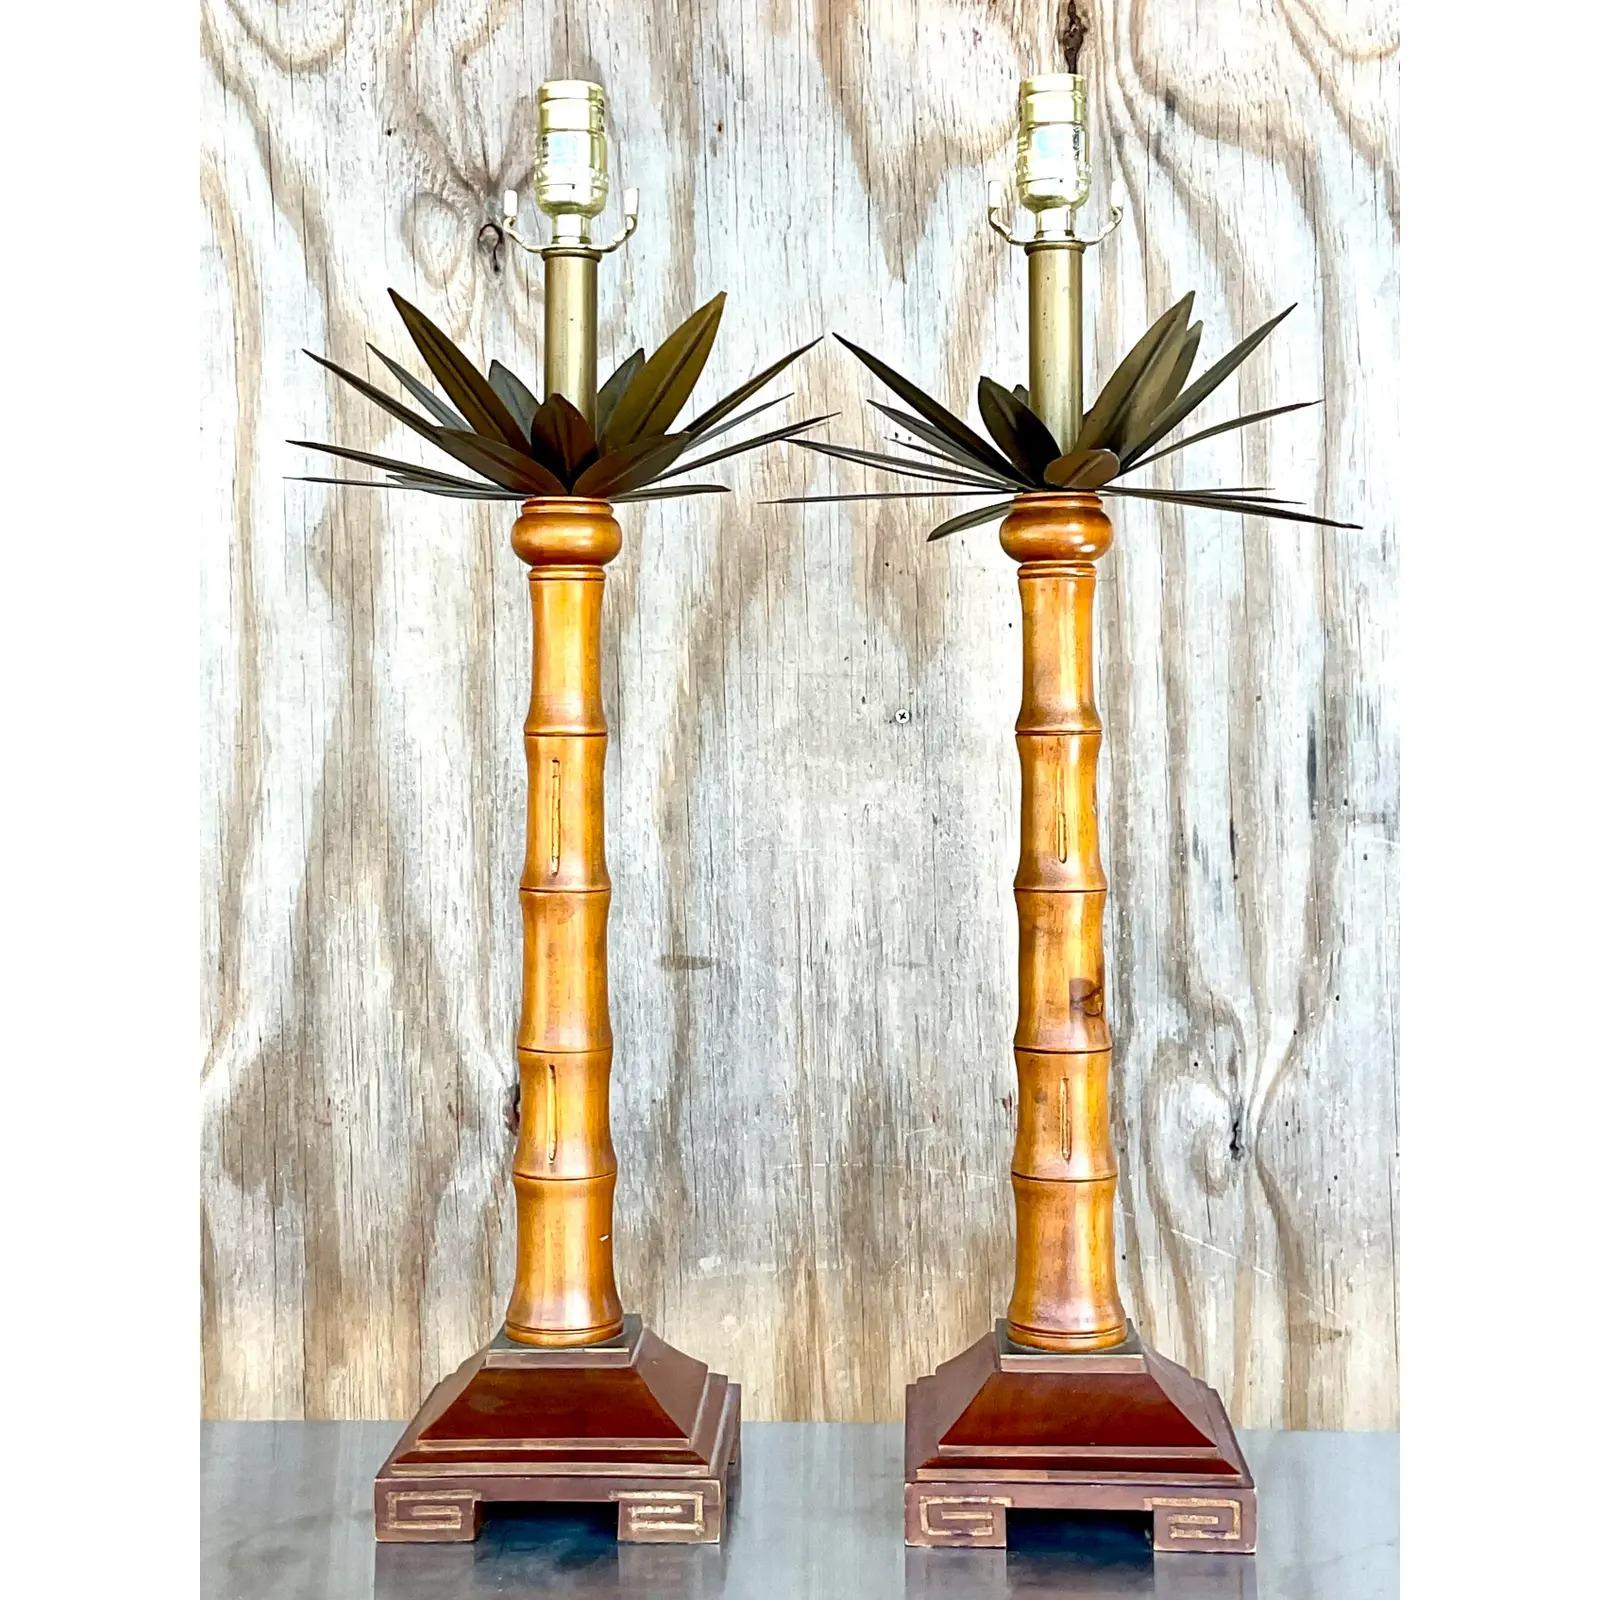 20th Century Vintage Coastal Brass and Wood Palm Tree Table Lamps - a Pair